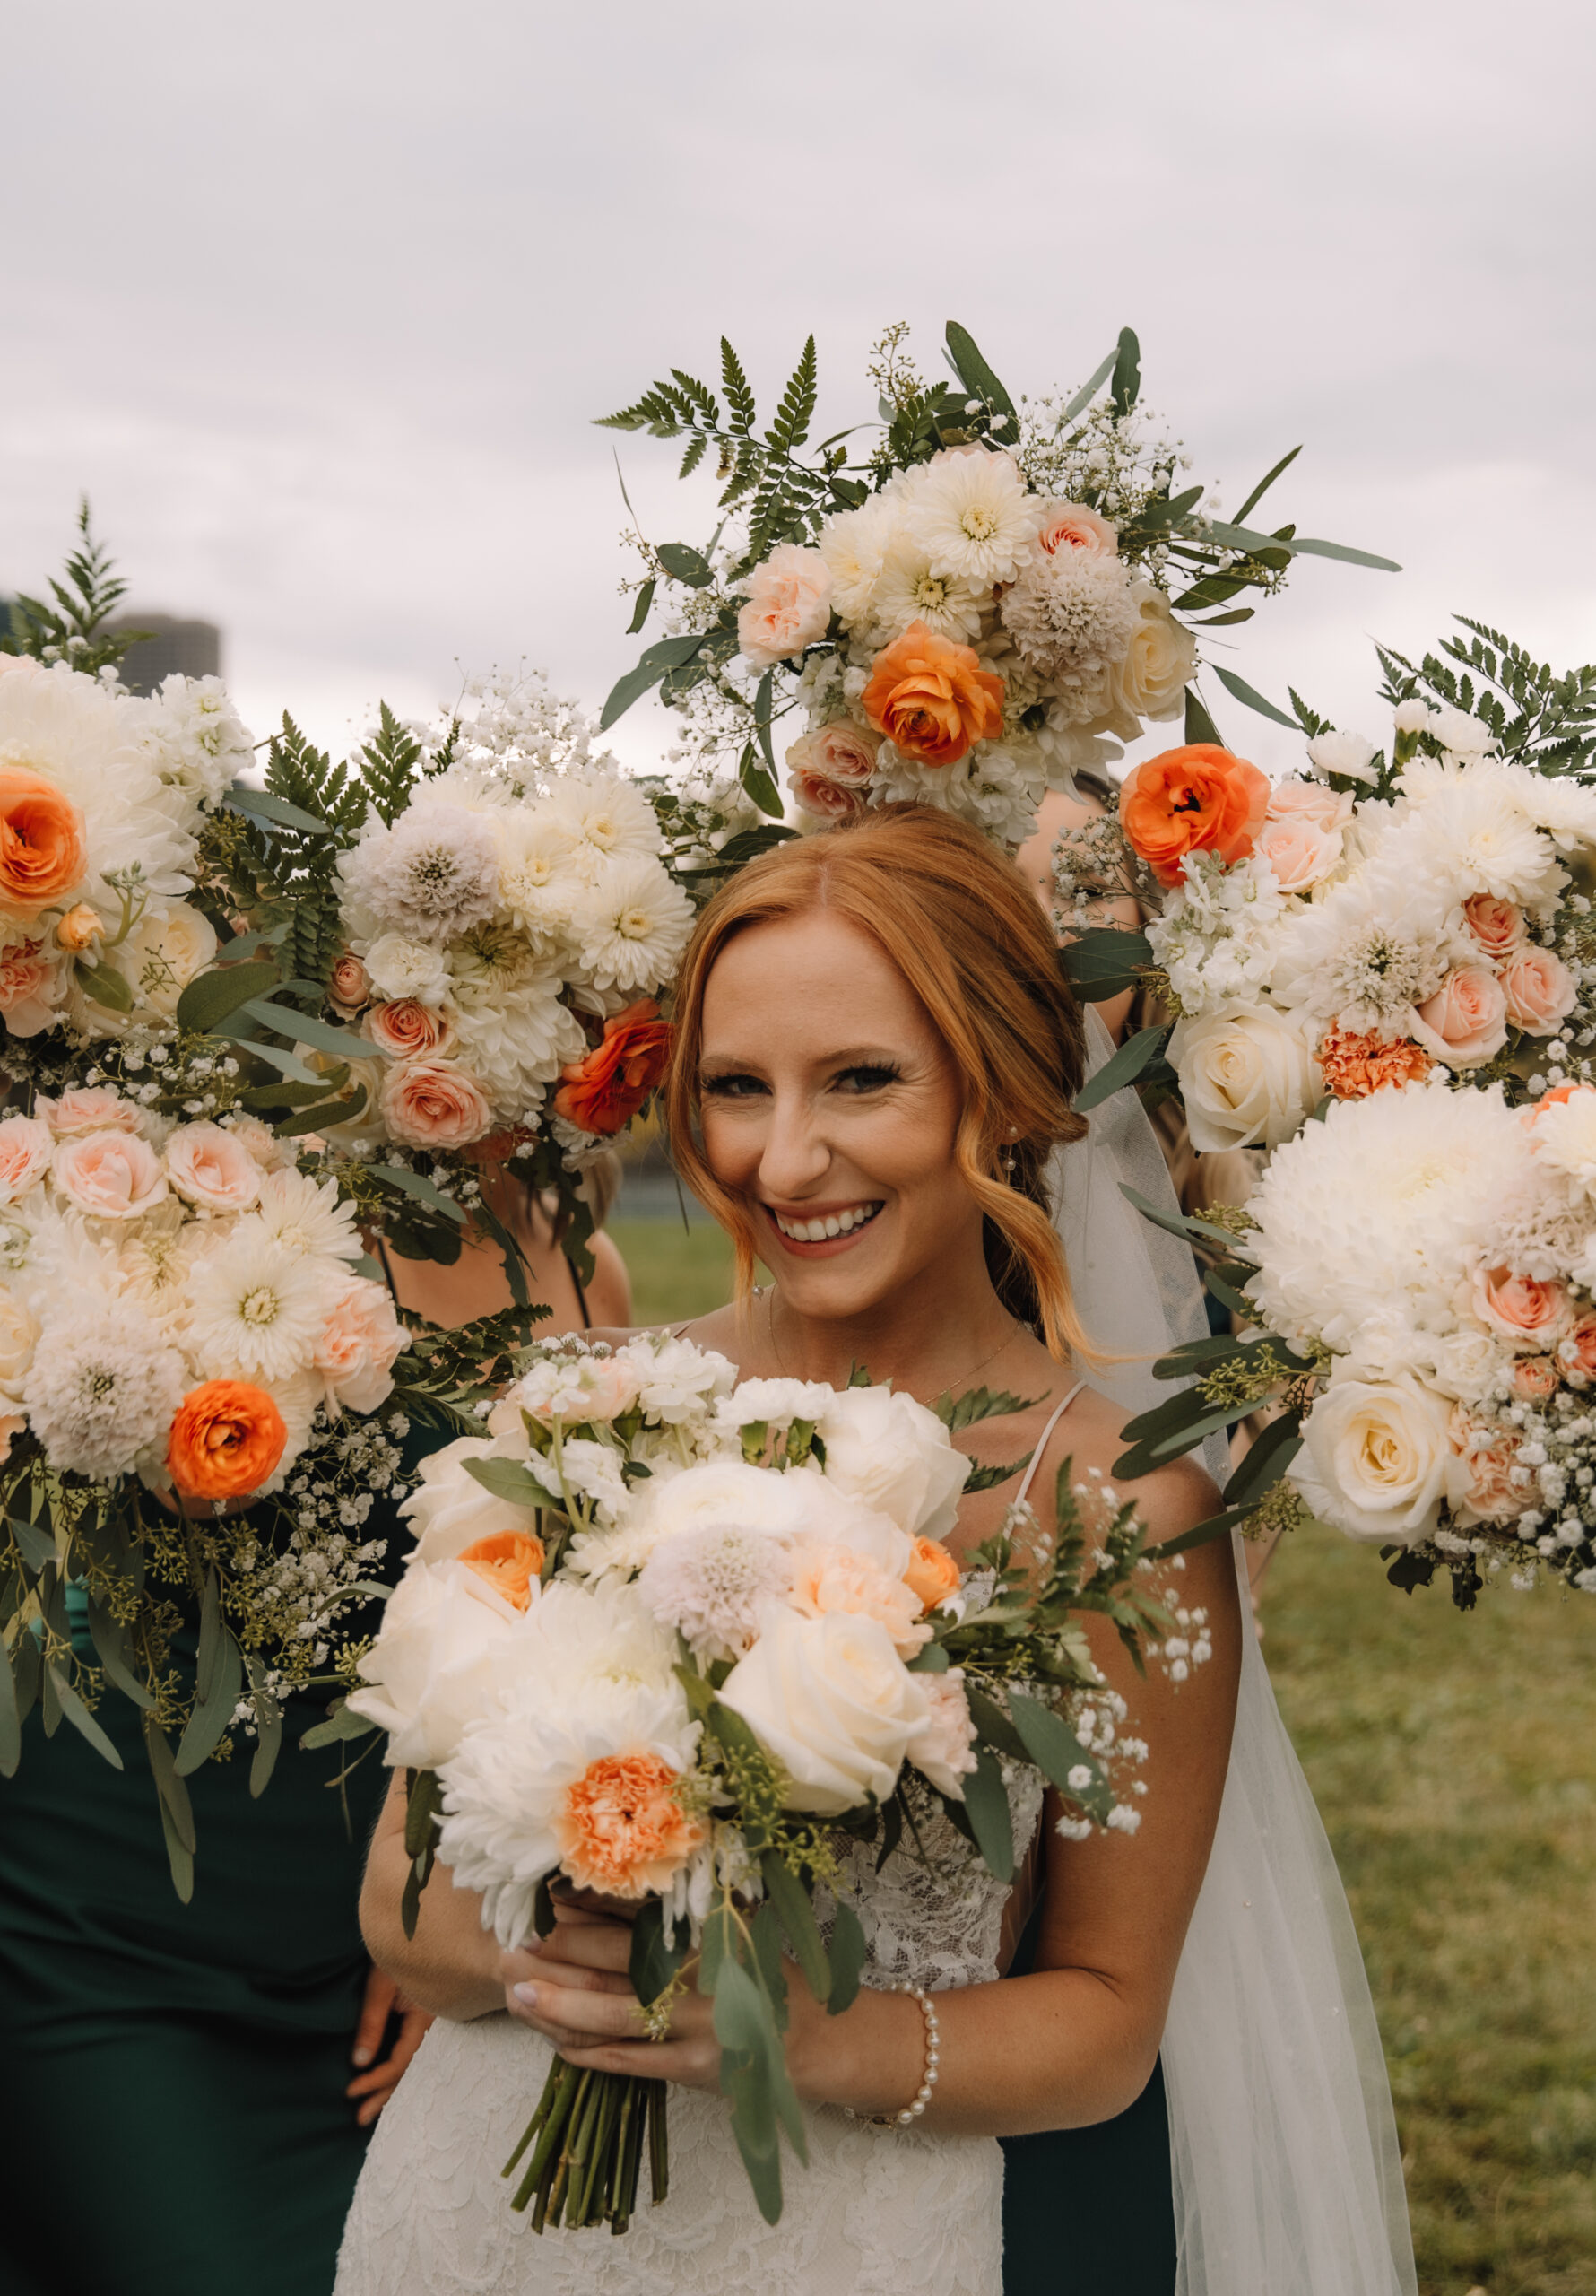 Bride smiling, holding a bouquet of white and peach flowers, with bridesmaids in teal dresses carrying similar bouquets, outdoor setting.